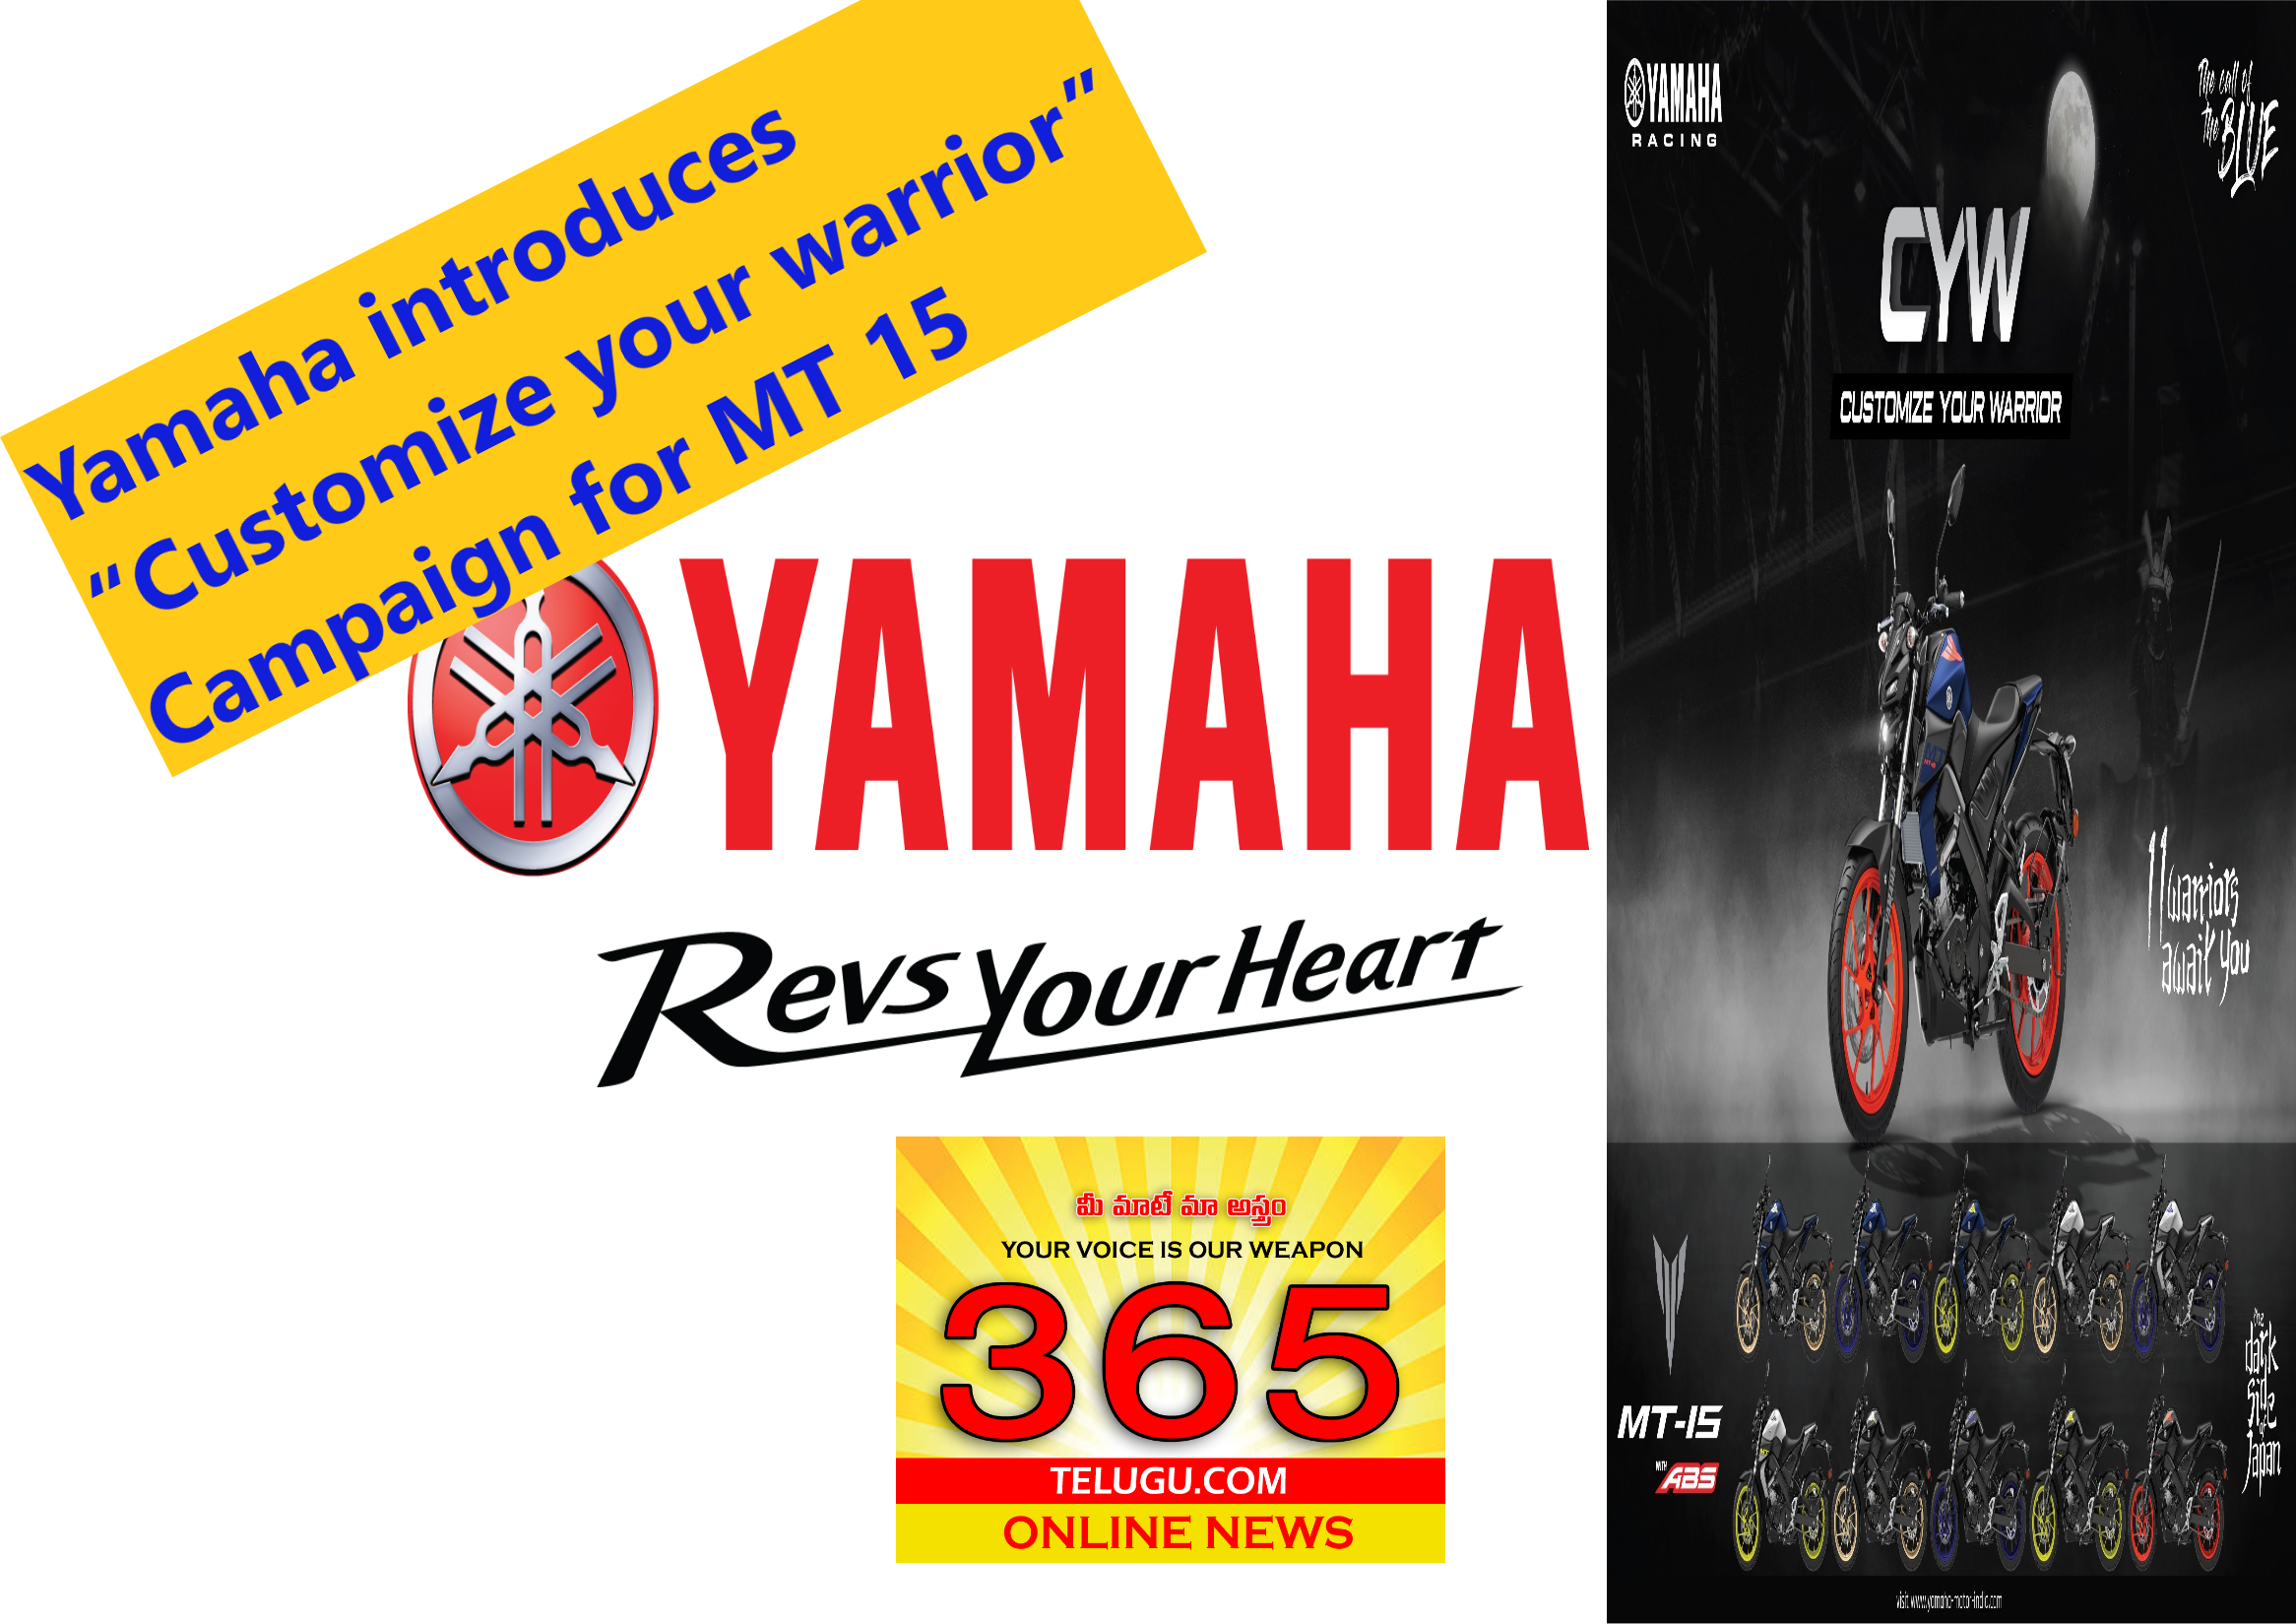 Yamaha introduces “Customize your warrior” Campaign for MT 15